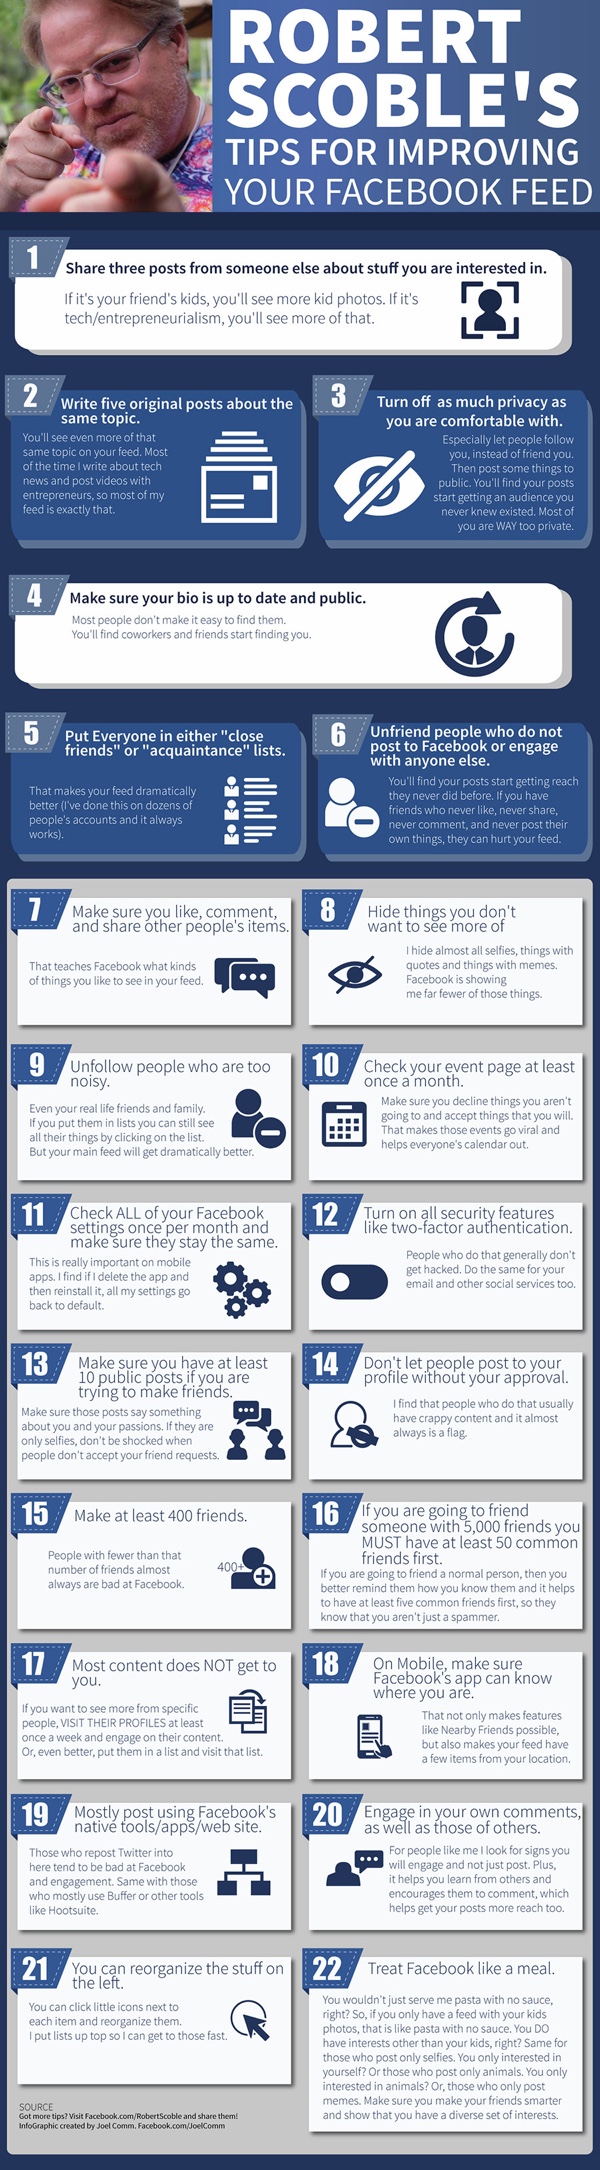 Robert Scoble's 22 Tips for Improving Your Facebook Feed infographic